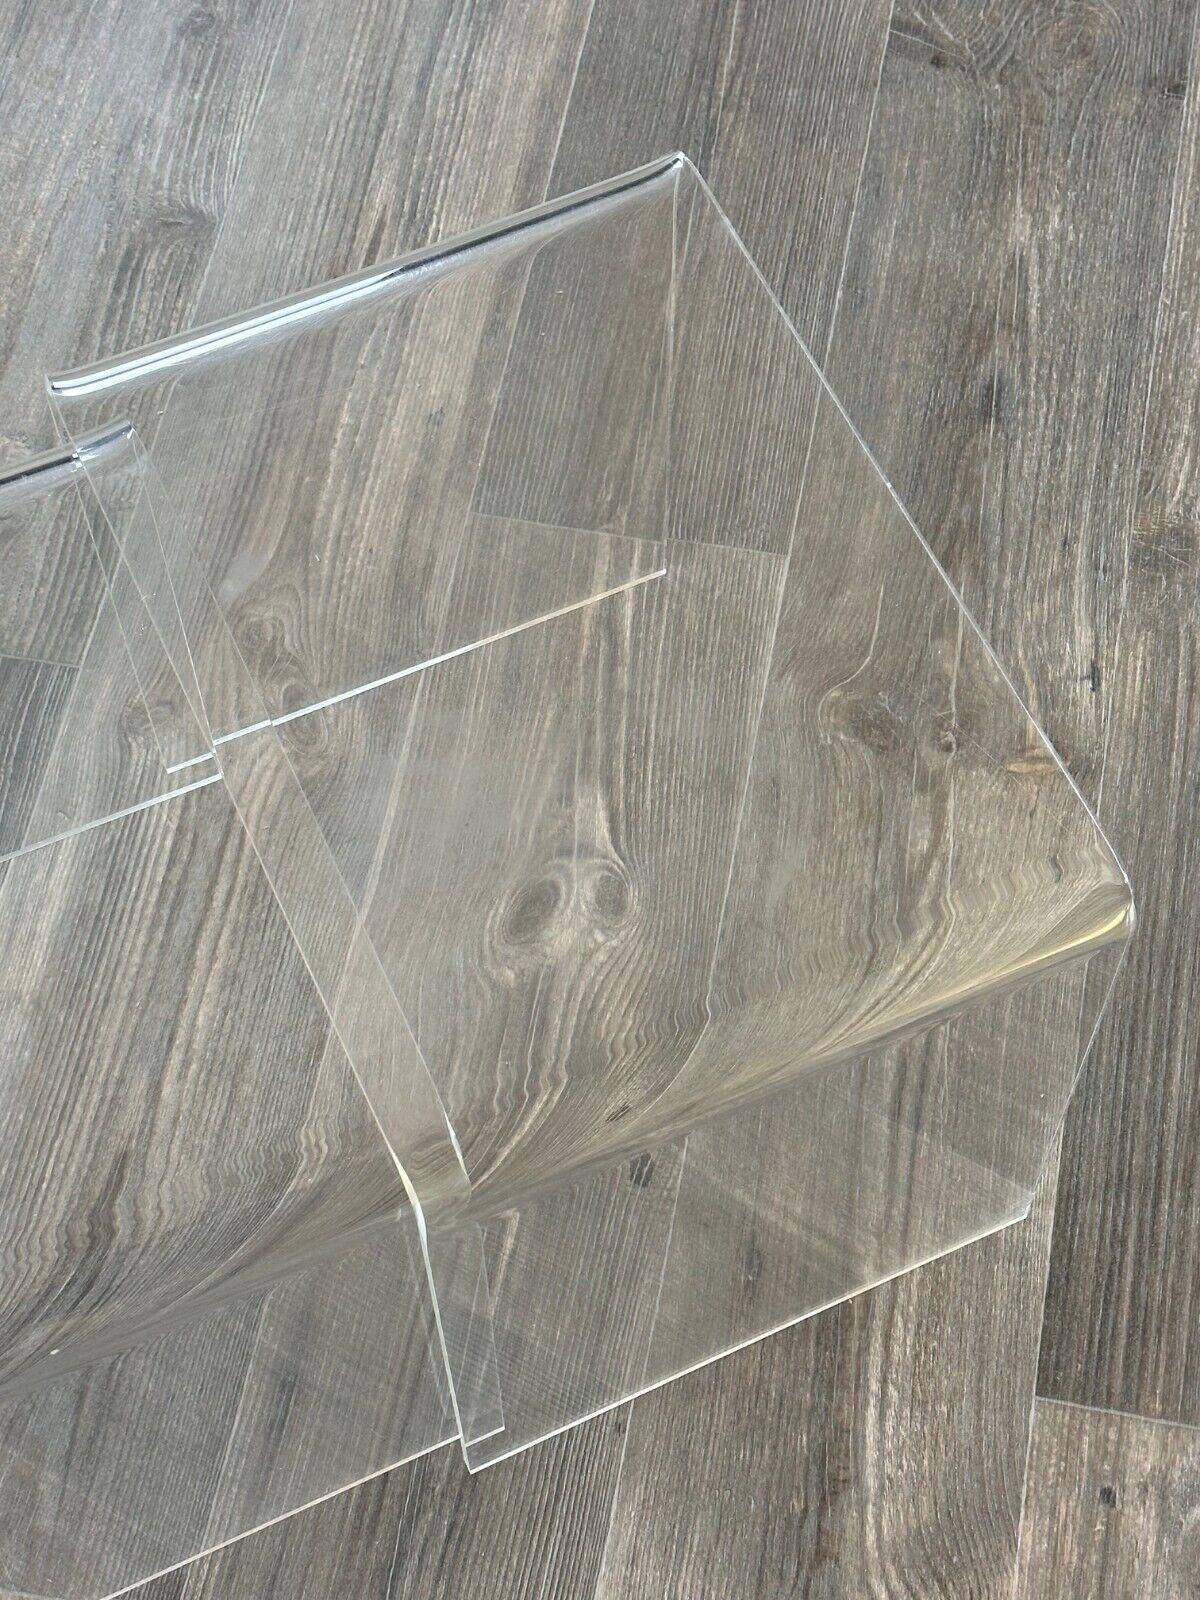 60s 70s Side Tables Nesting Tables Acrylic Plastic Space Age Design For Sale 11